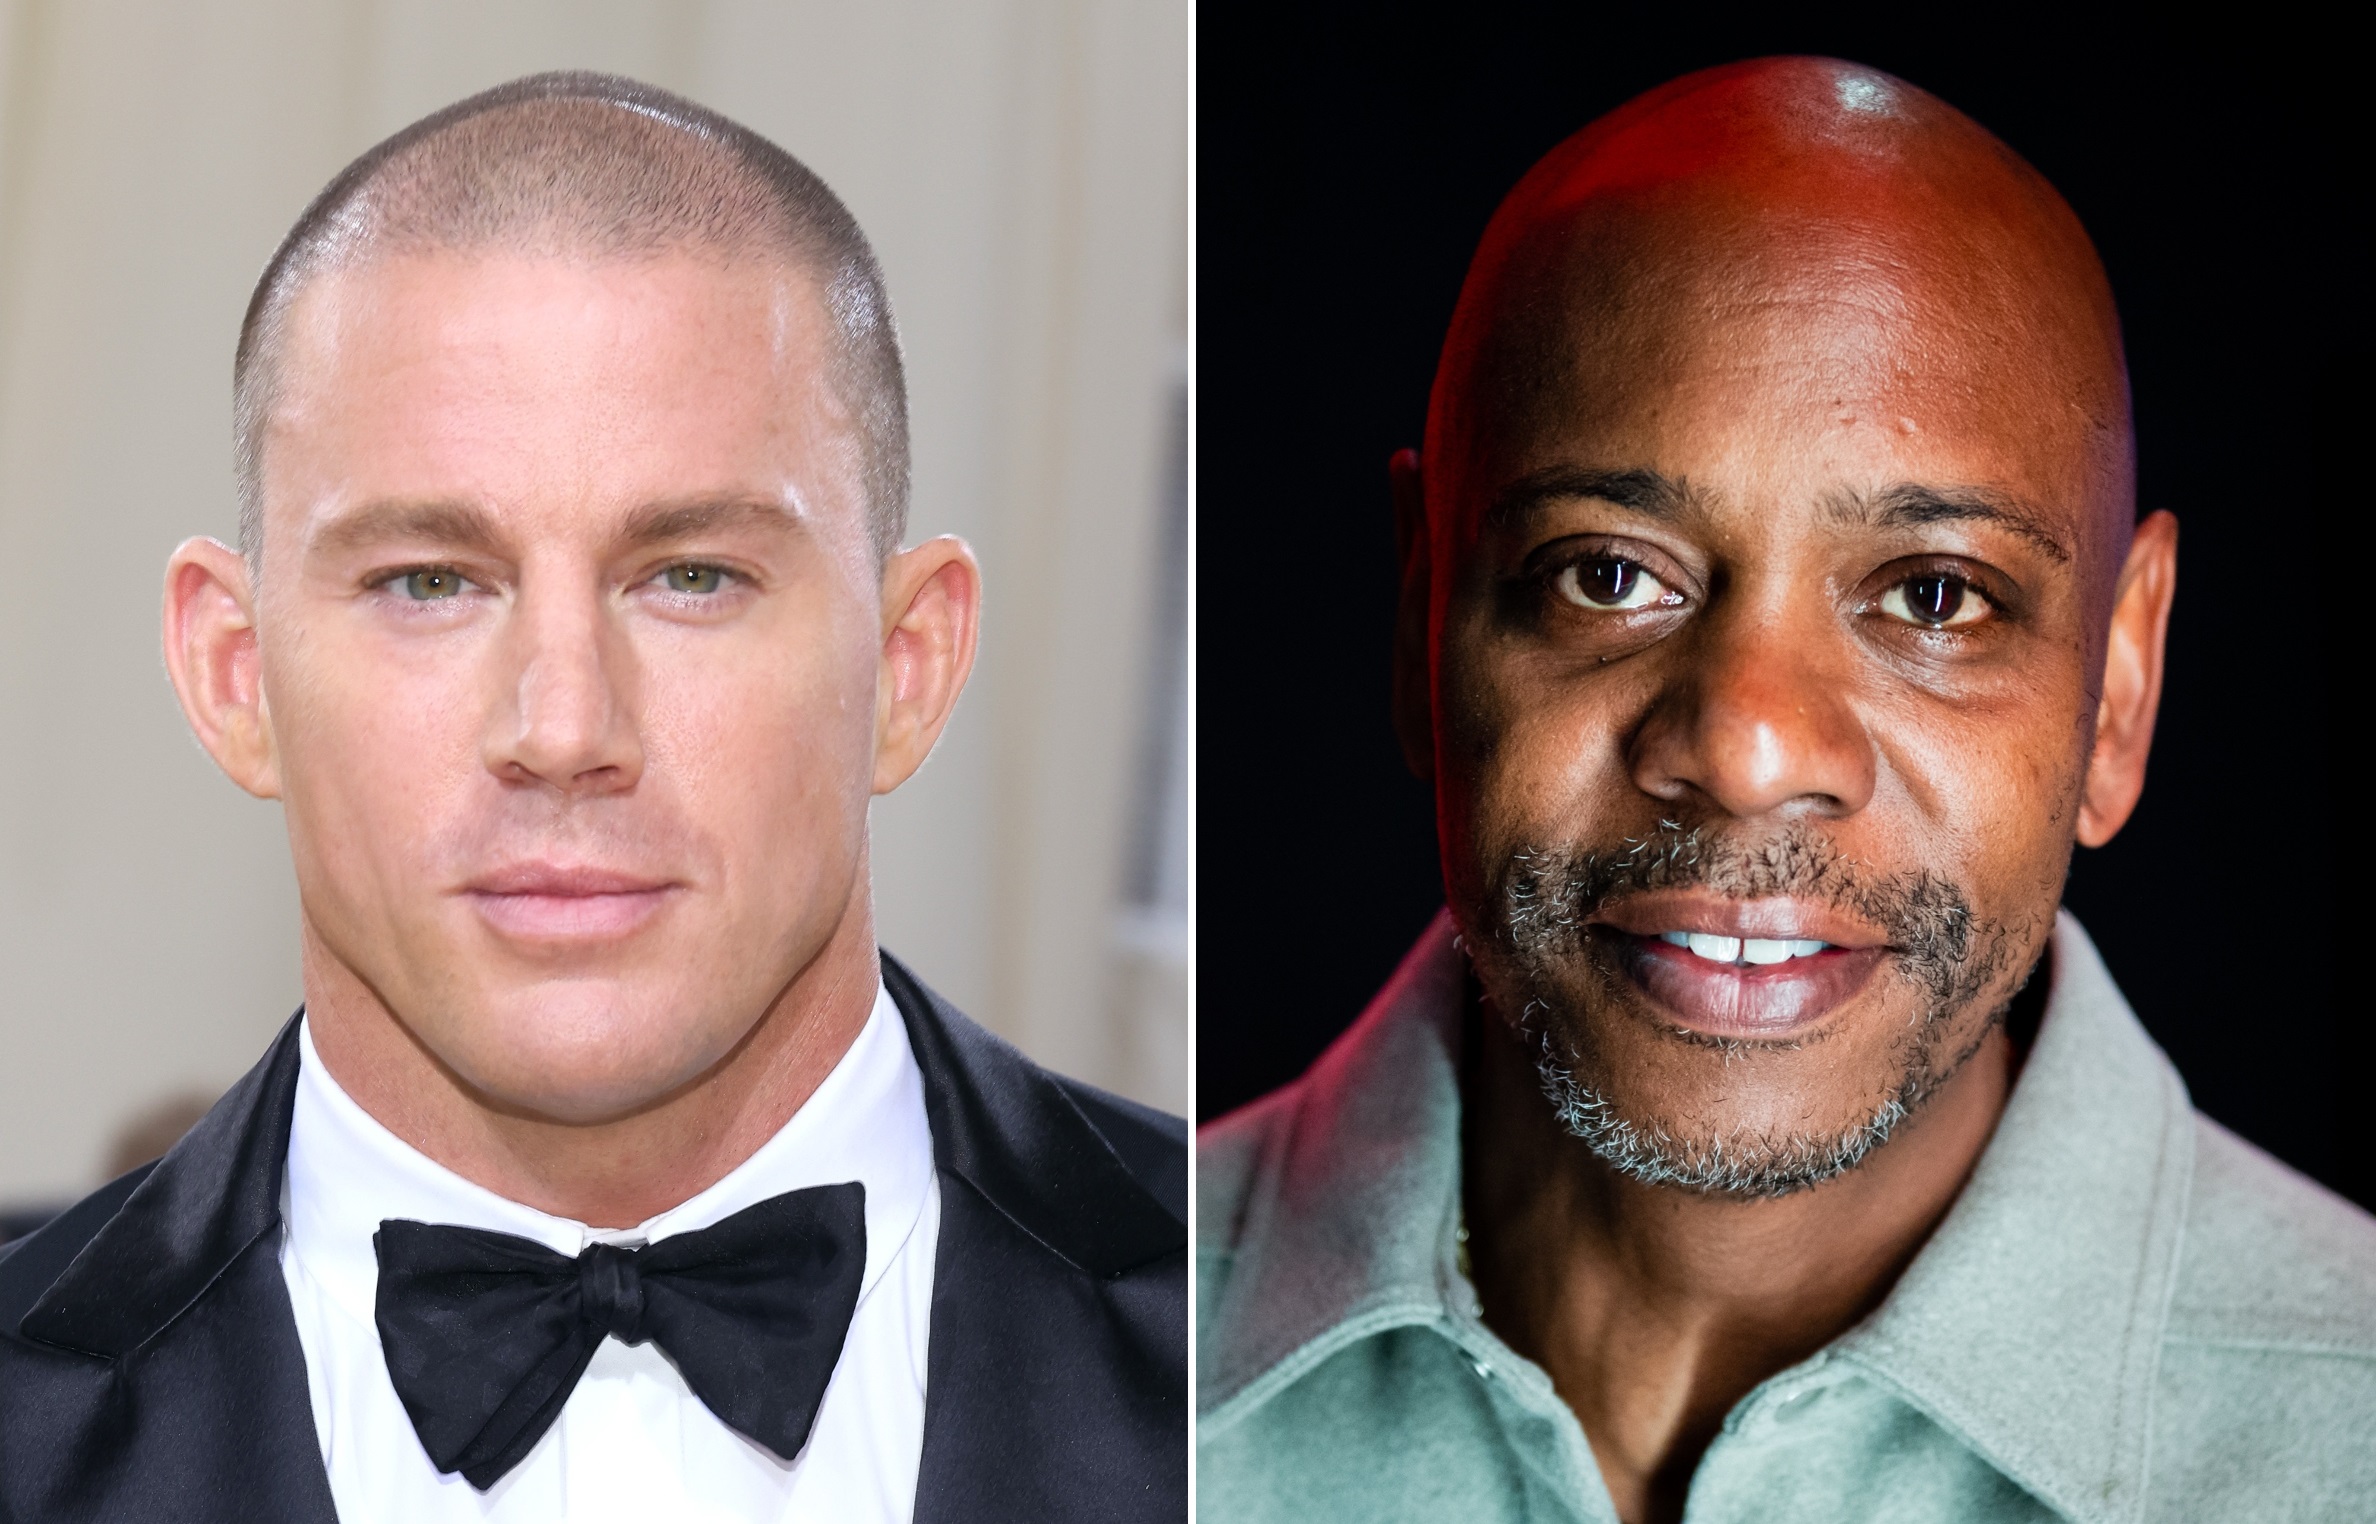 What Channing Tatum Said About Dave Chappelle As More People Wade In On Controversy - Newsweek